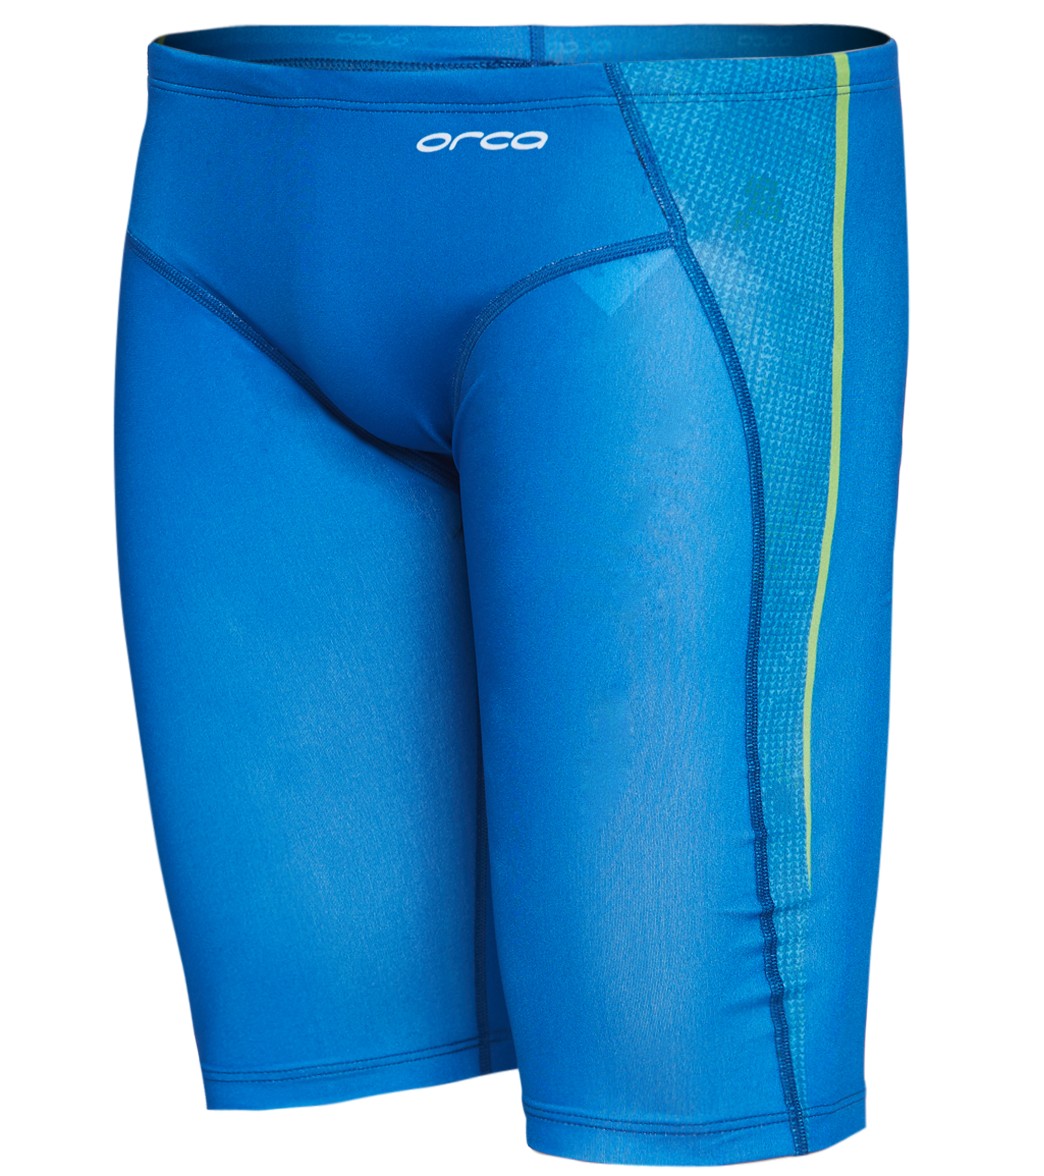 Orca Men's Swim Jammer at SwimOutlet.com - Free Shipping